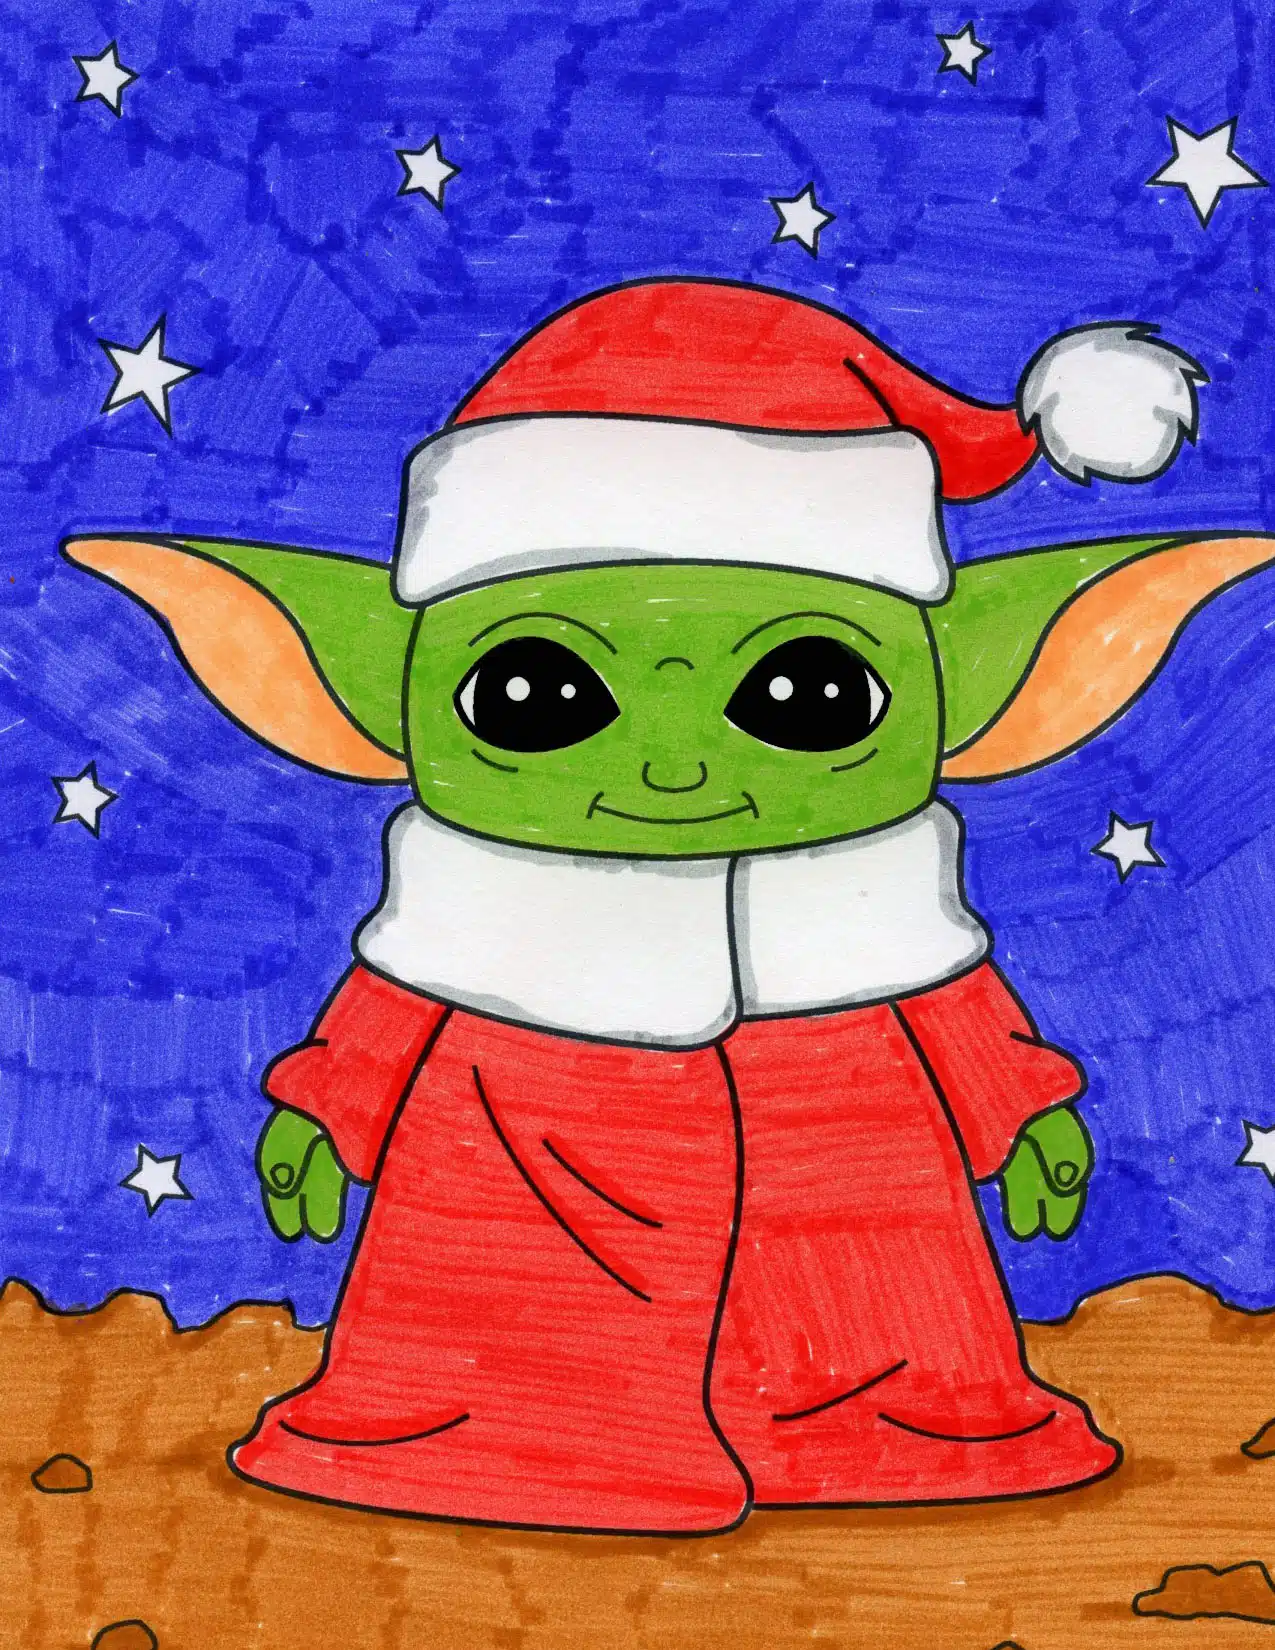 How to Draw Baby Yoda | Art Projects for Kids | Bloglovin'